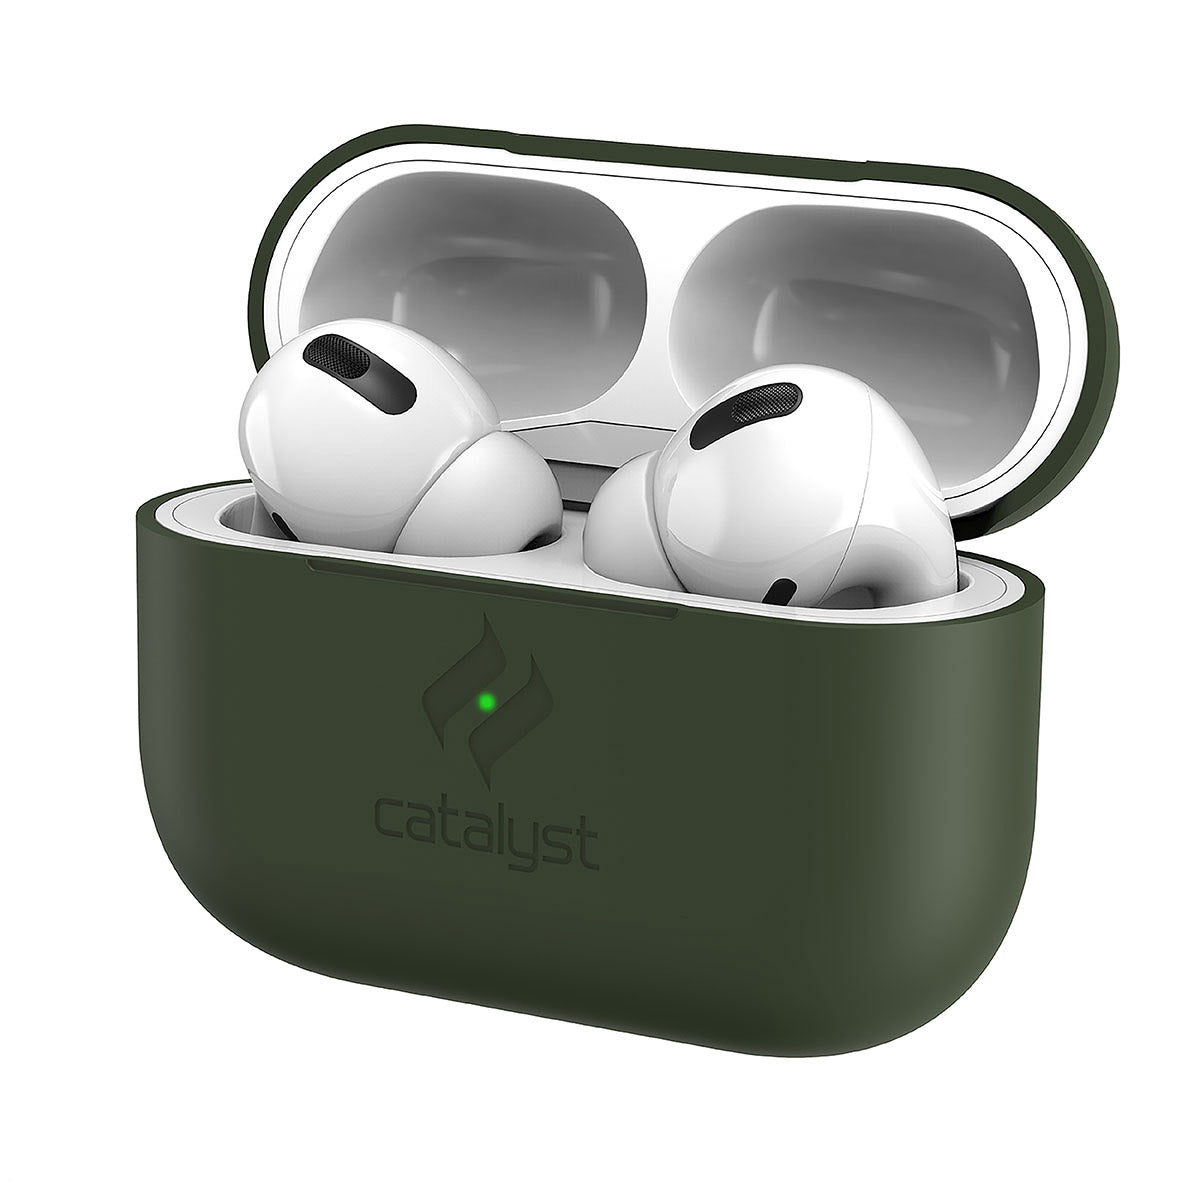 Catalyst airpods pro gen 2/1 slim case showing a closer look of front view of the case in army green colorway